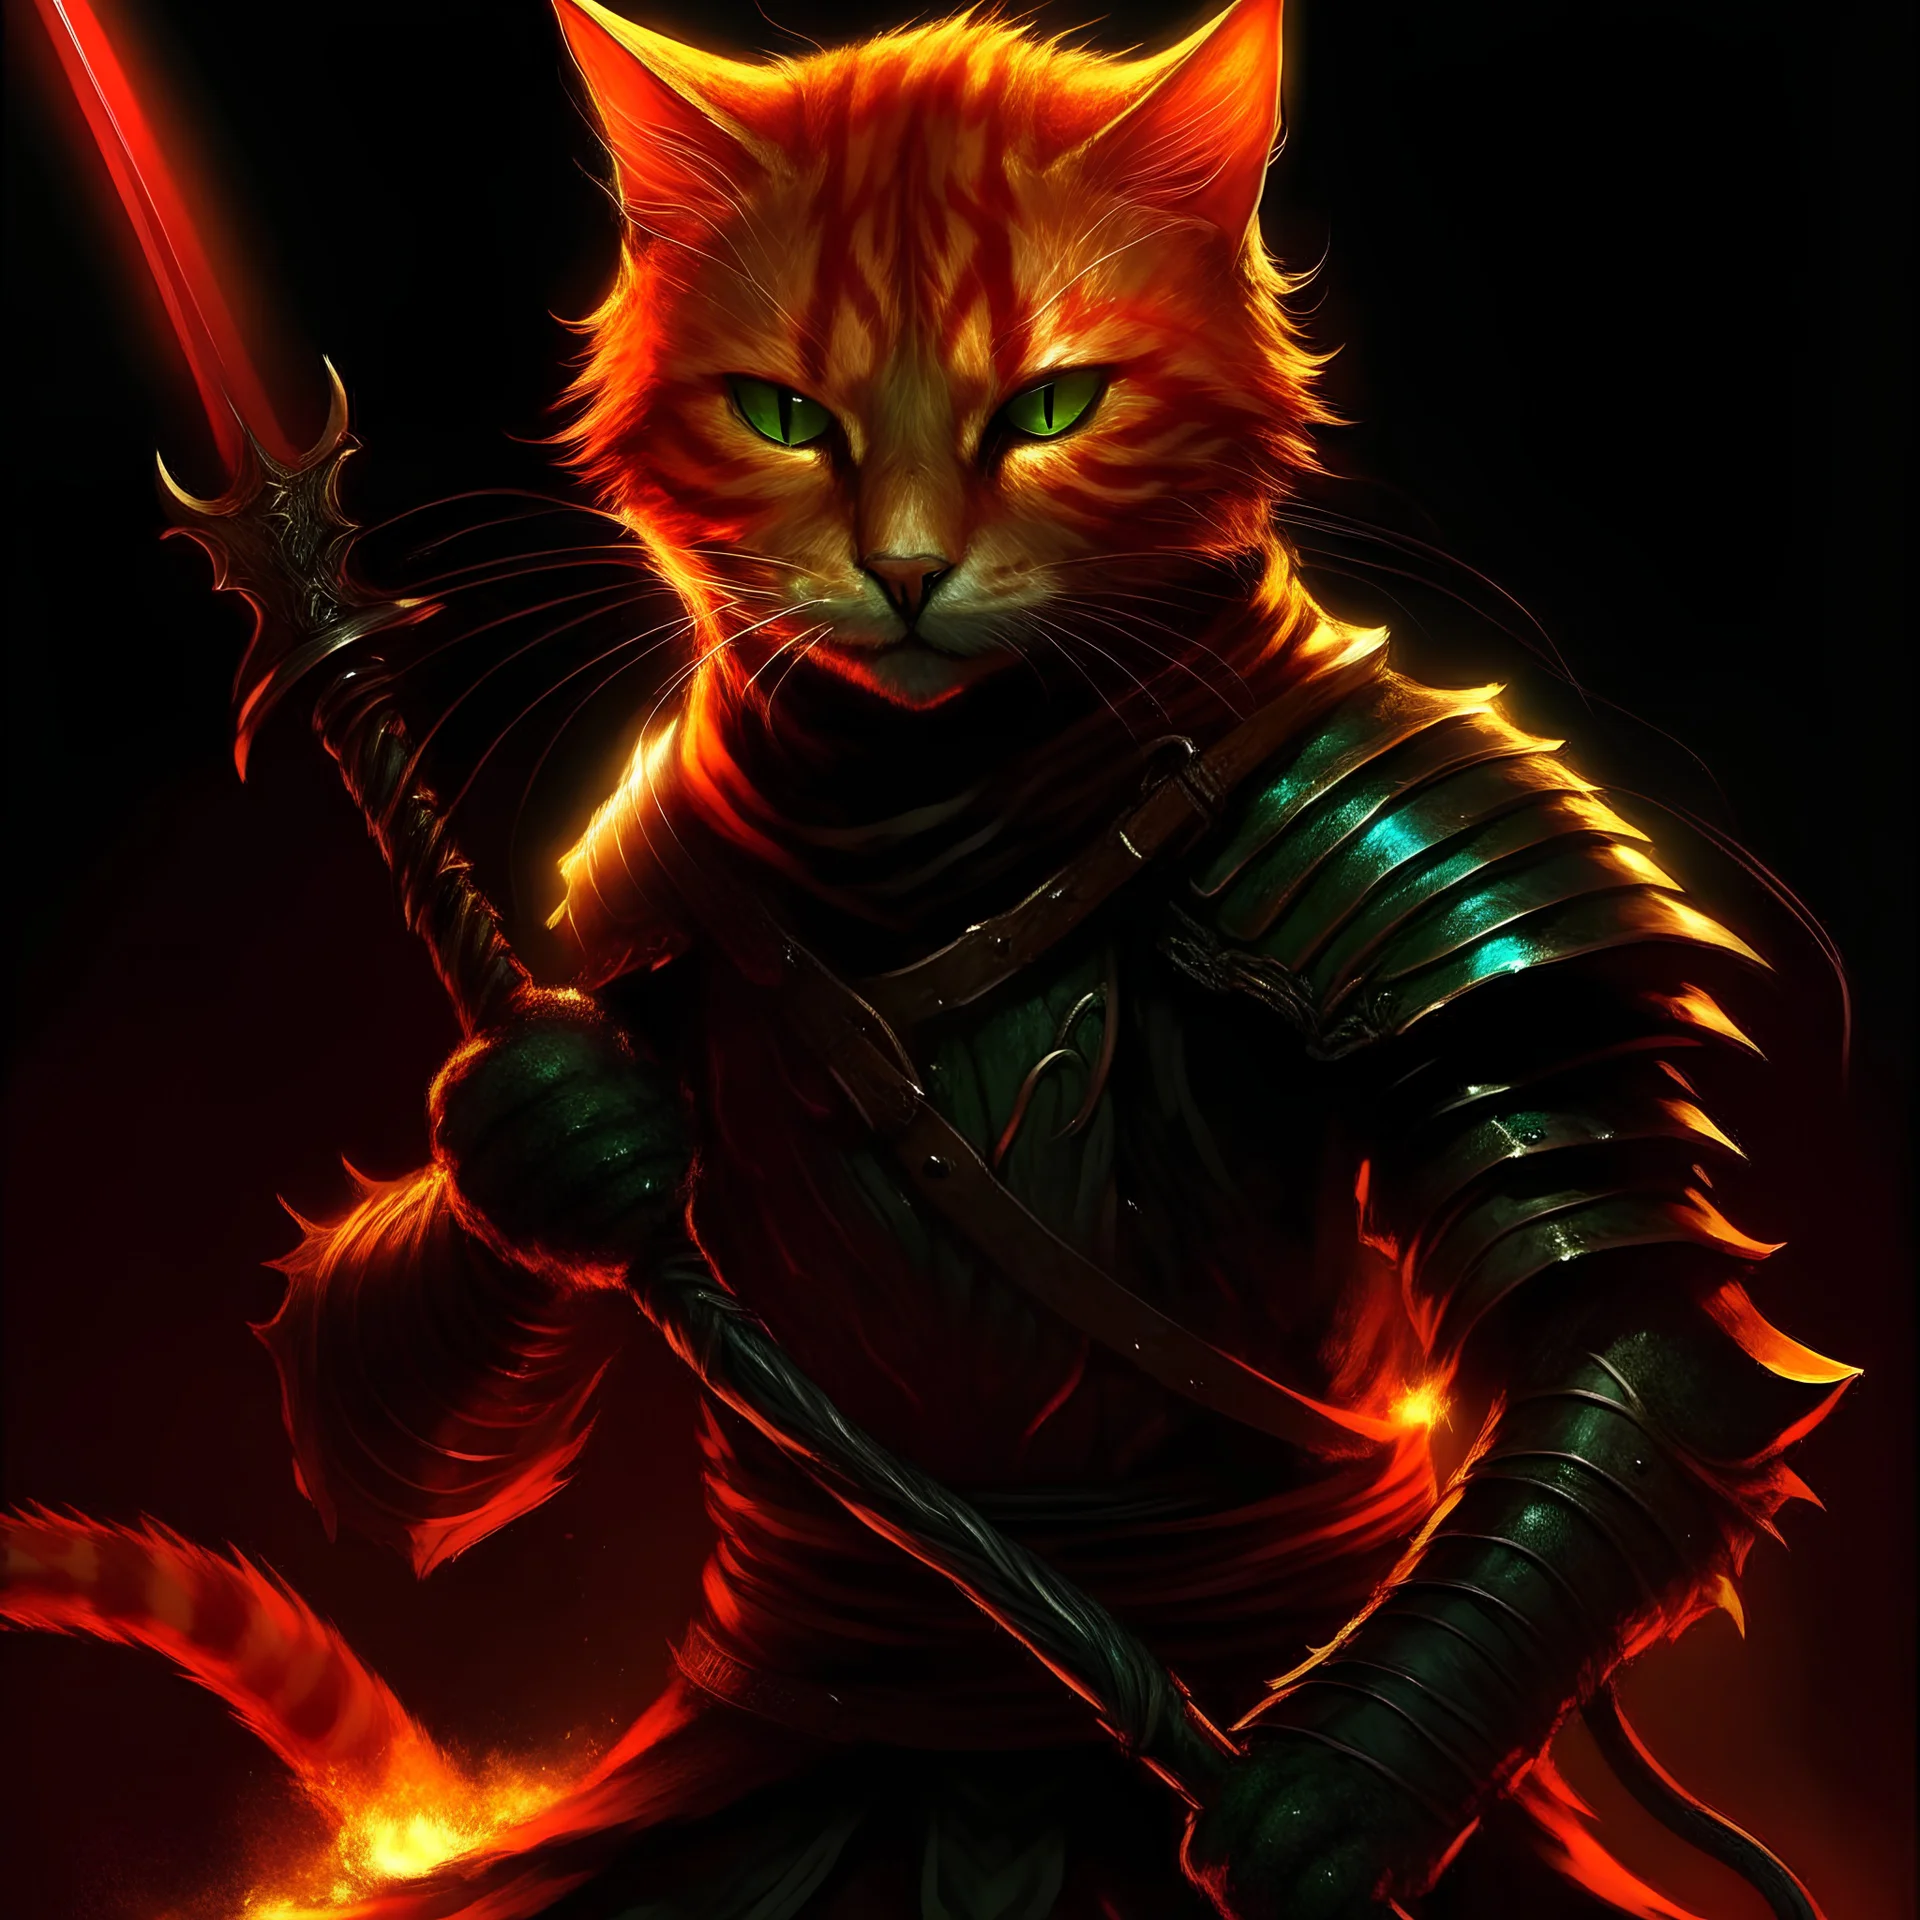 A realistic humanoid cat, sunset orange fur, blood red stripes, Wearing black leather armour, Wielding a rapier, grinning, Scar over right eye, Glowing green eyes, shrouded in shadows, combat pose in air, sparks and flames surrounding